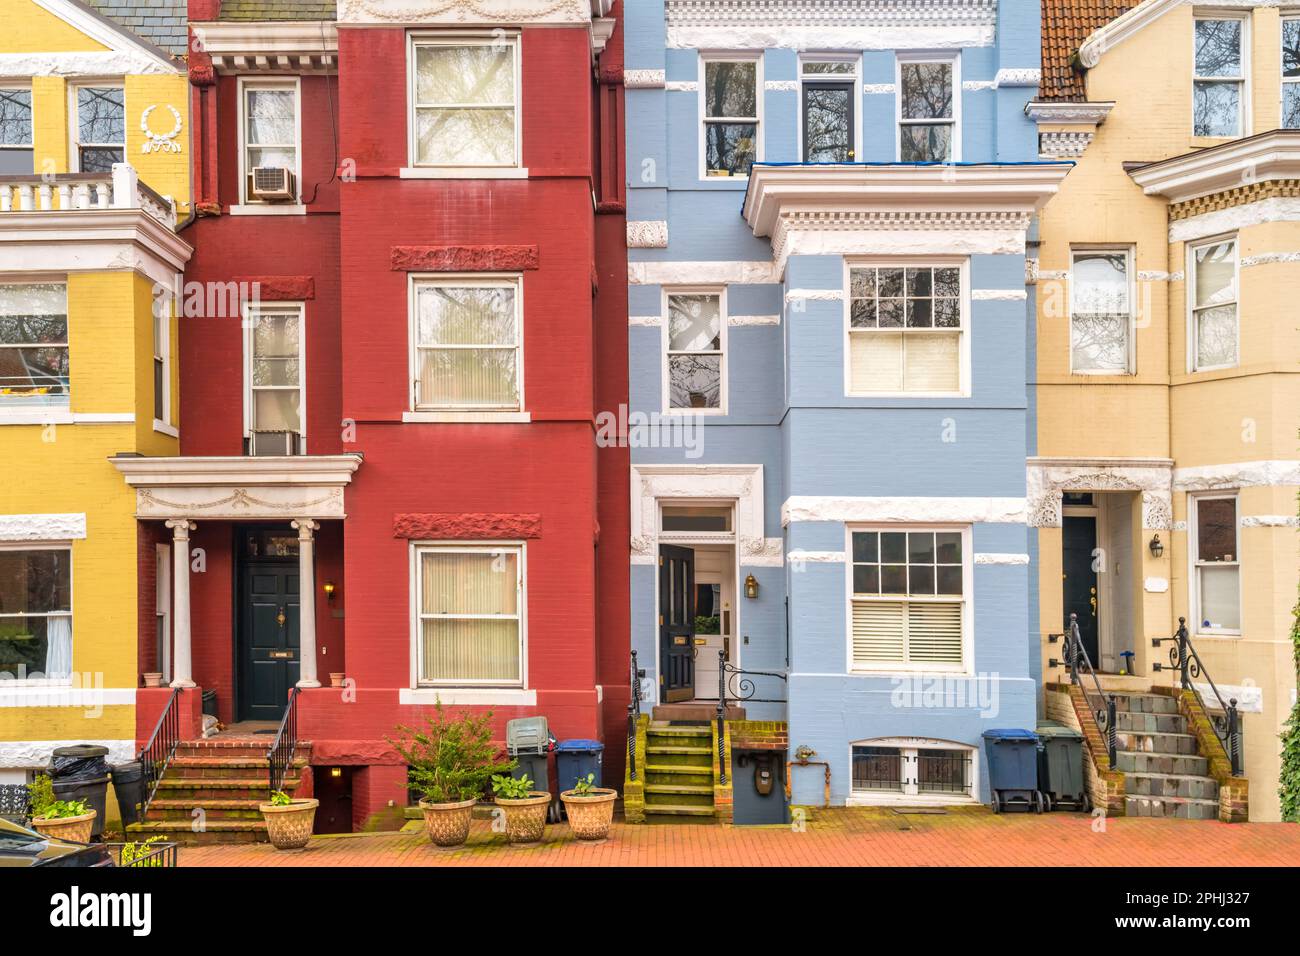 Colorful townhouses in Georgetown district of Washington DC, USA. Stock Photo